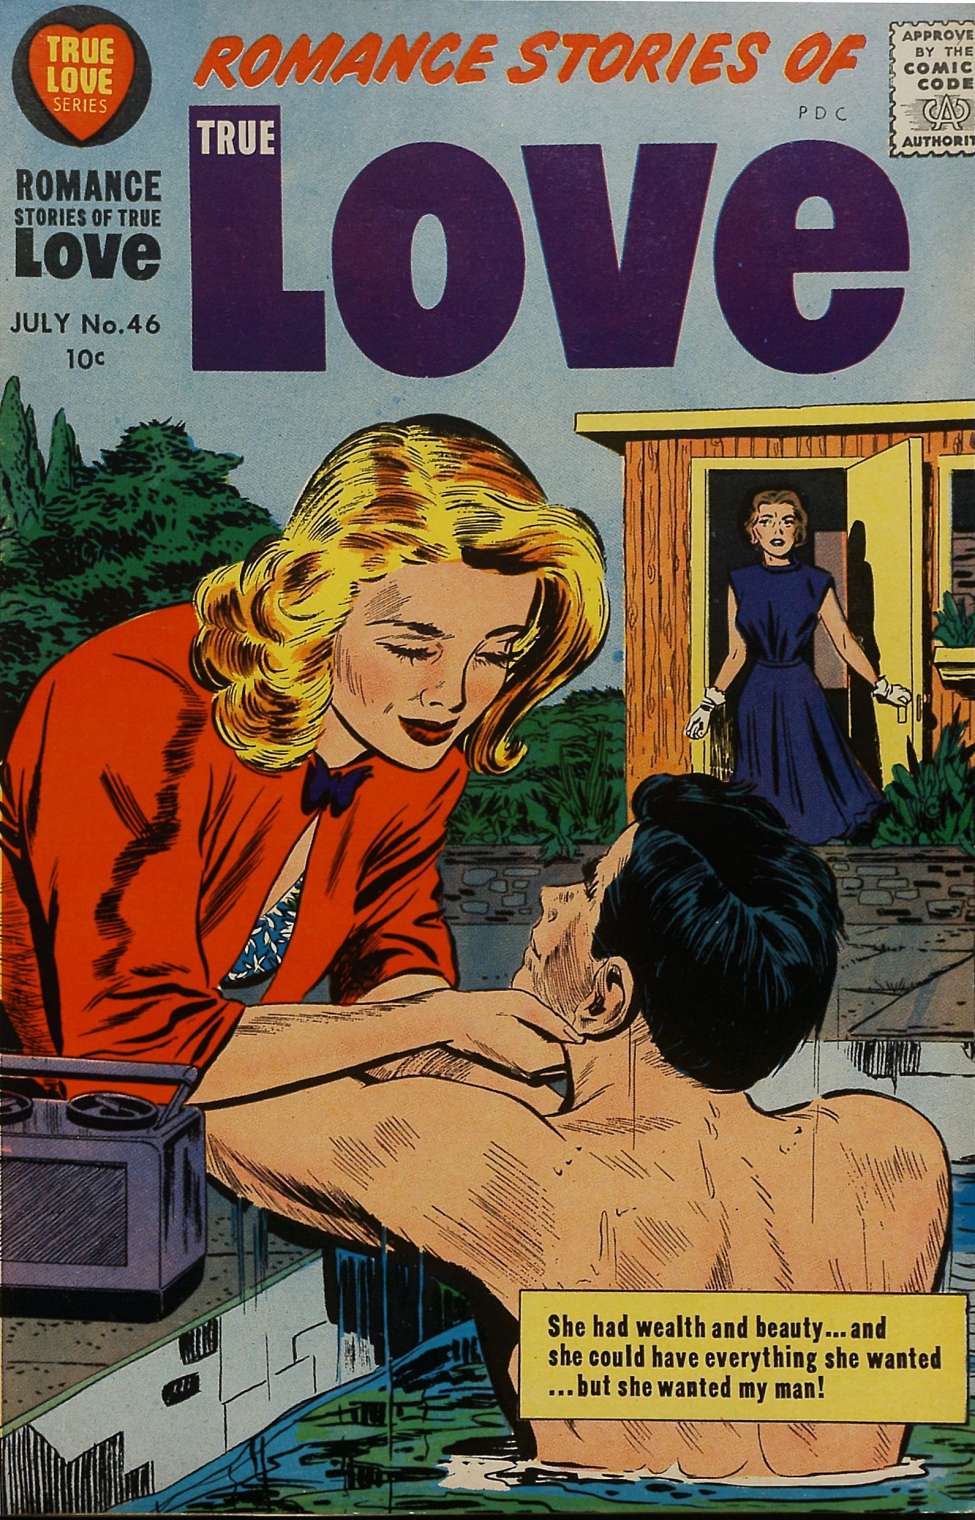 Book Cover For Romance Stories of True Love 46